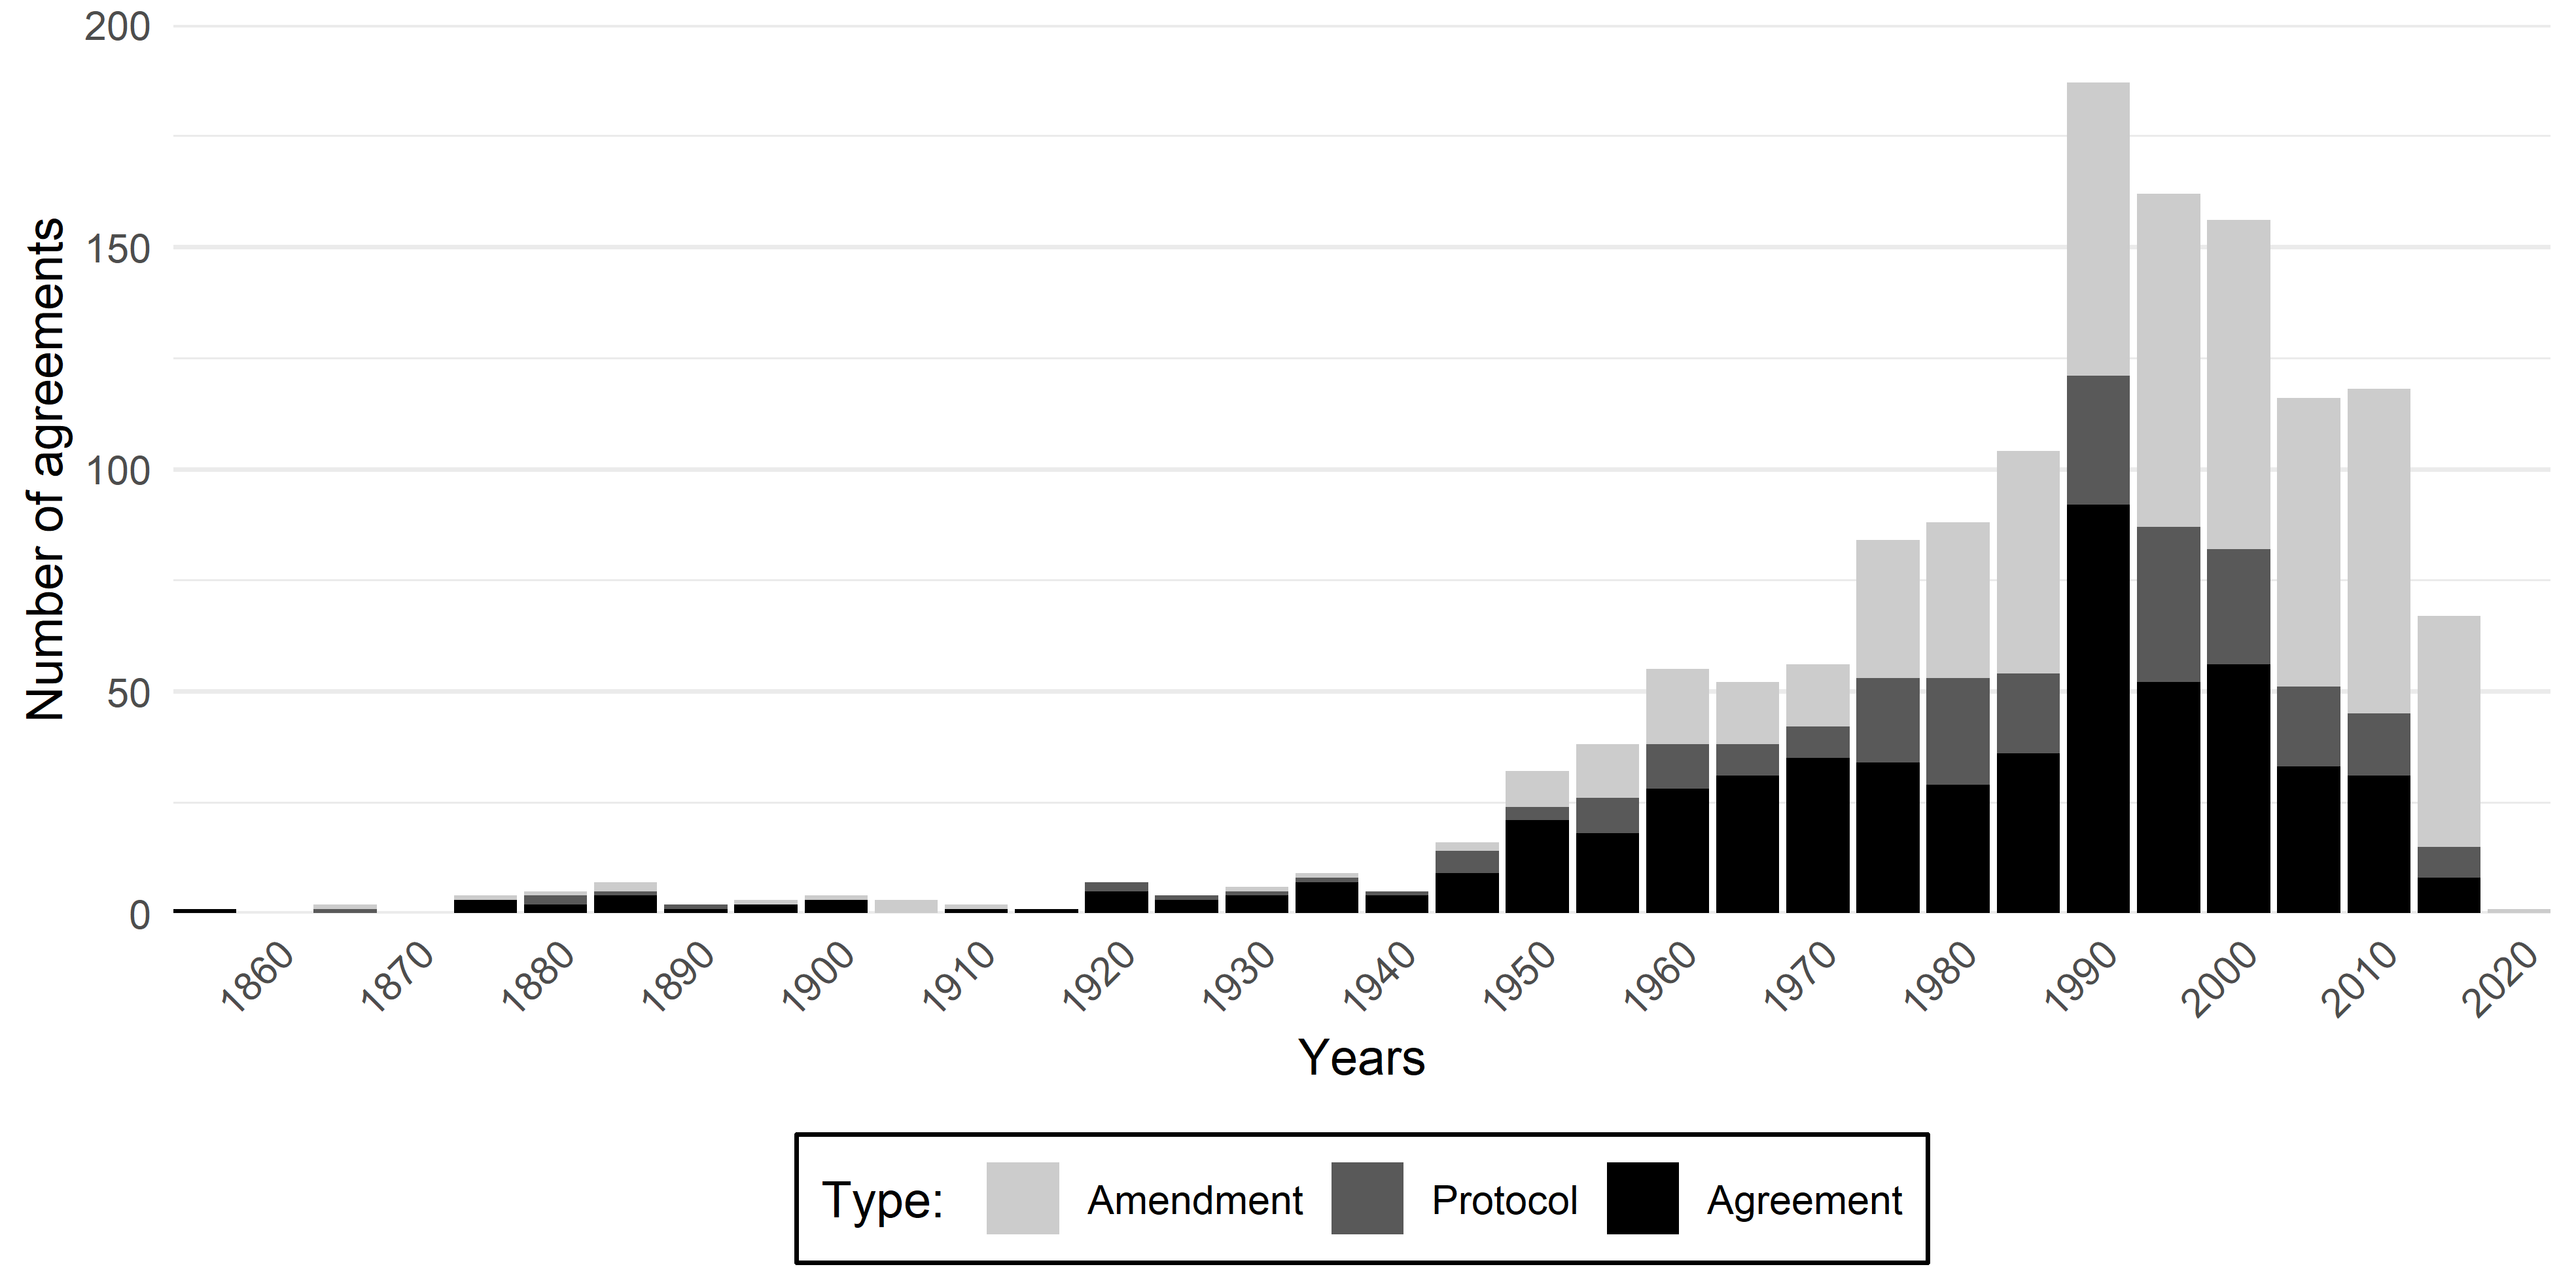 Number of multilateral environmental agreements by year <br>Data from @treatyiea